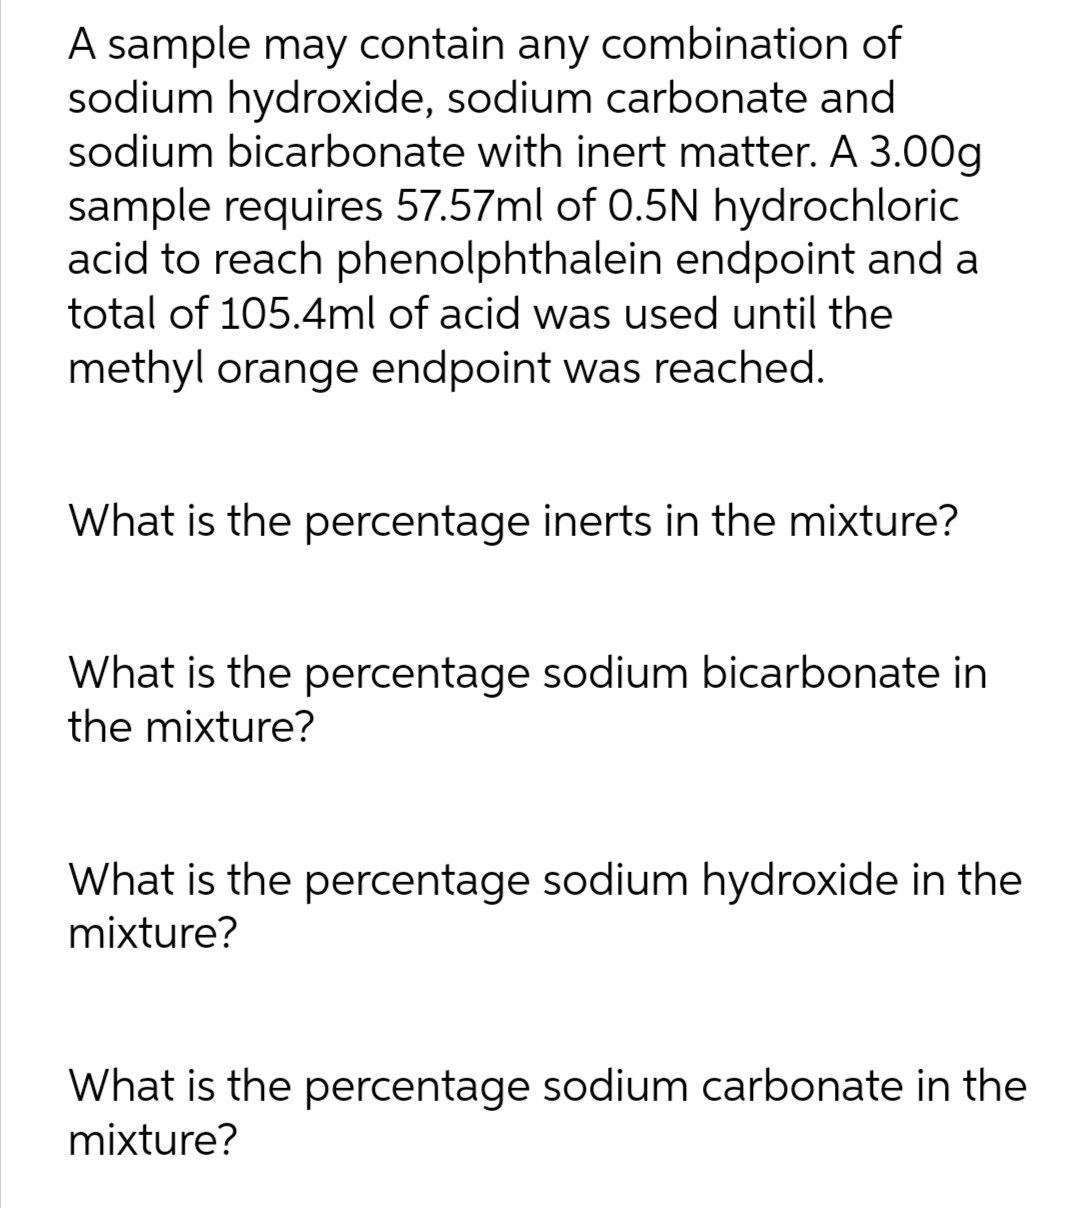 A sample may contain any combination of
sodium hydroxide, sodium carbonate and
sodium bicarbonate with inert matter. A 3.00g
sample requires 57.57ml of 0.5N hydrochloric
acid to reach phenolphthalein endpoint and a
total of 105.4ml of acid was used until the
methyl orange endpoint was reached.
What is the percentage inerts in the mixture?
What is the percentage sodium bicarbonate in
the mixture?
What is the percentage sodium hydroxide in the
mixture?
What is the percentage sodium carbonate in the
mixture?